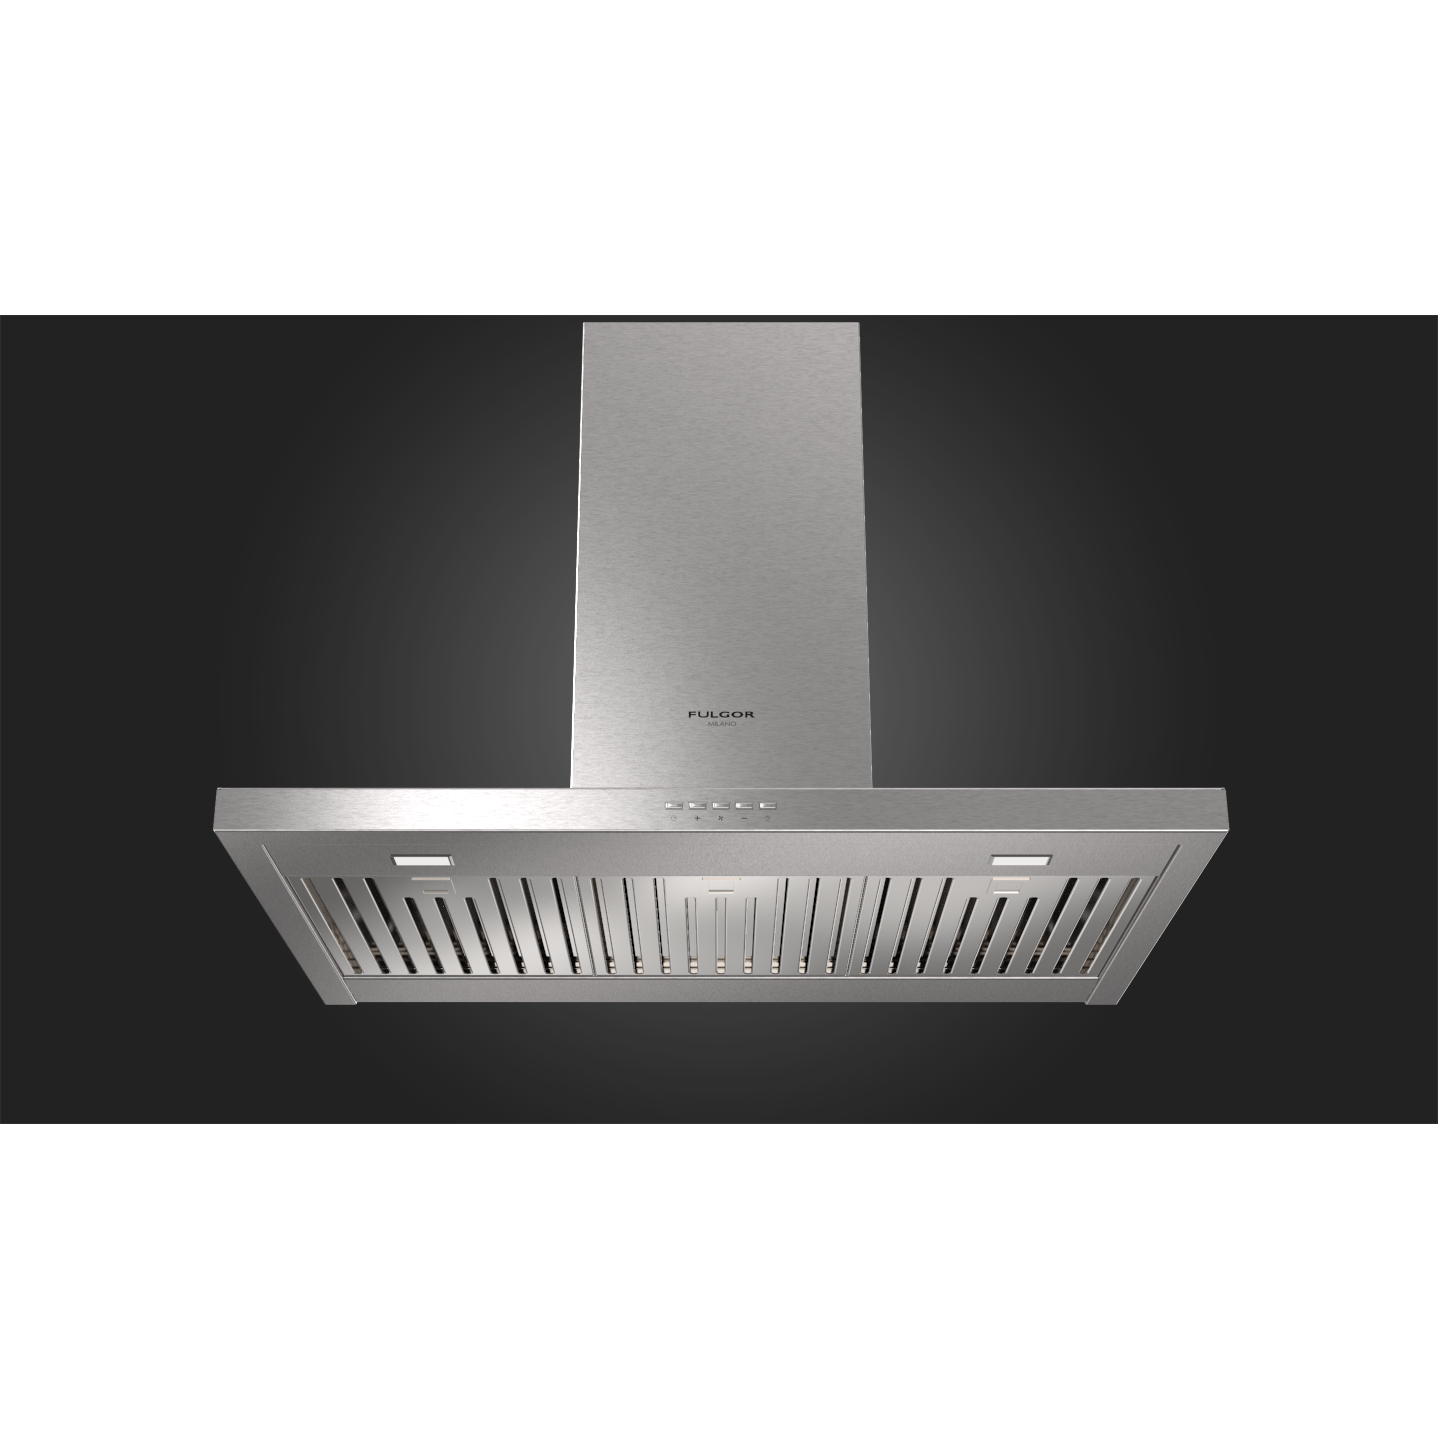 Fulgor Milano 30" Chimney Wall Mount Range Hood with 4-Speeds, Stainless Steel - F4CW30S1